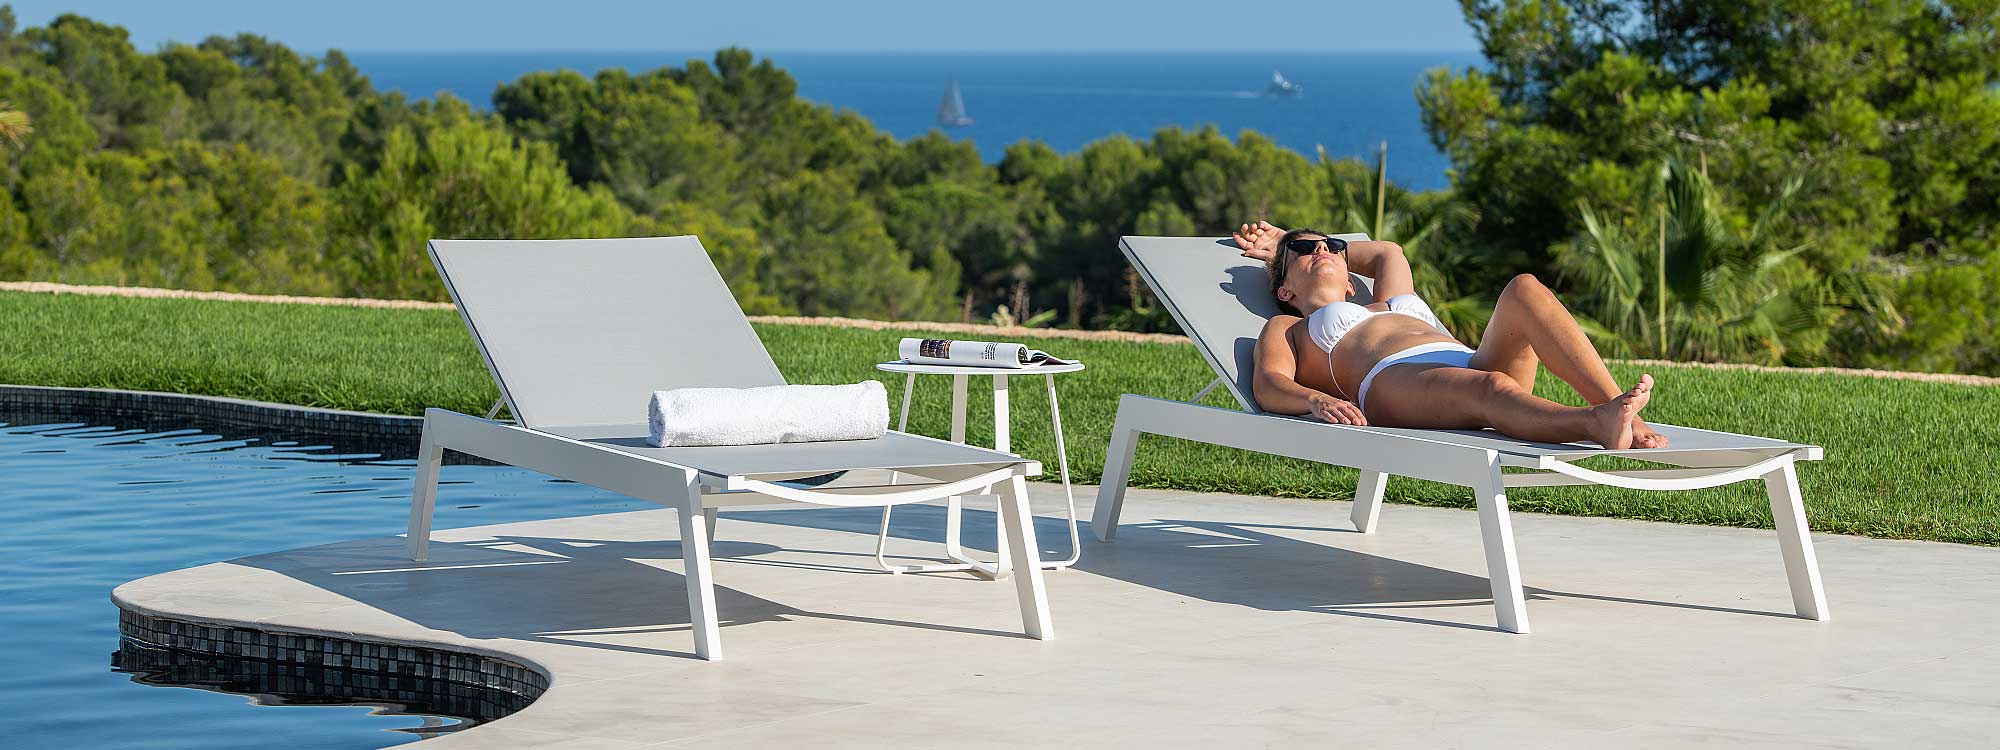 Image of pair of Vigo XL white sun loungers with woman lying in one, with lawns, woodland and blue sea and sky in the background